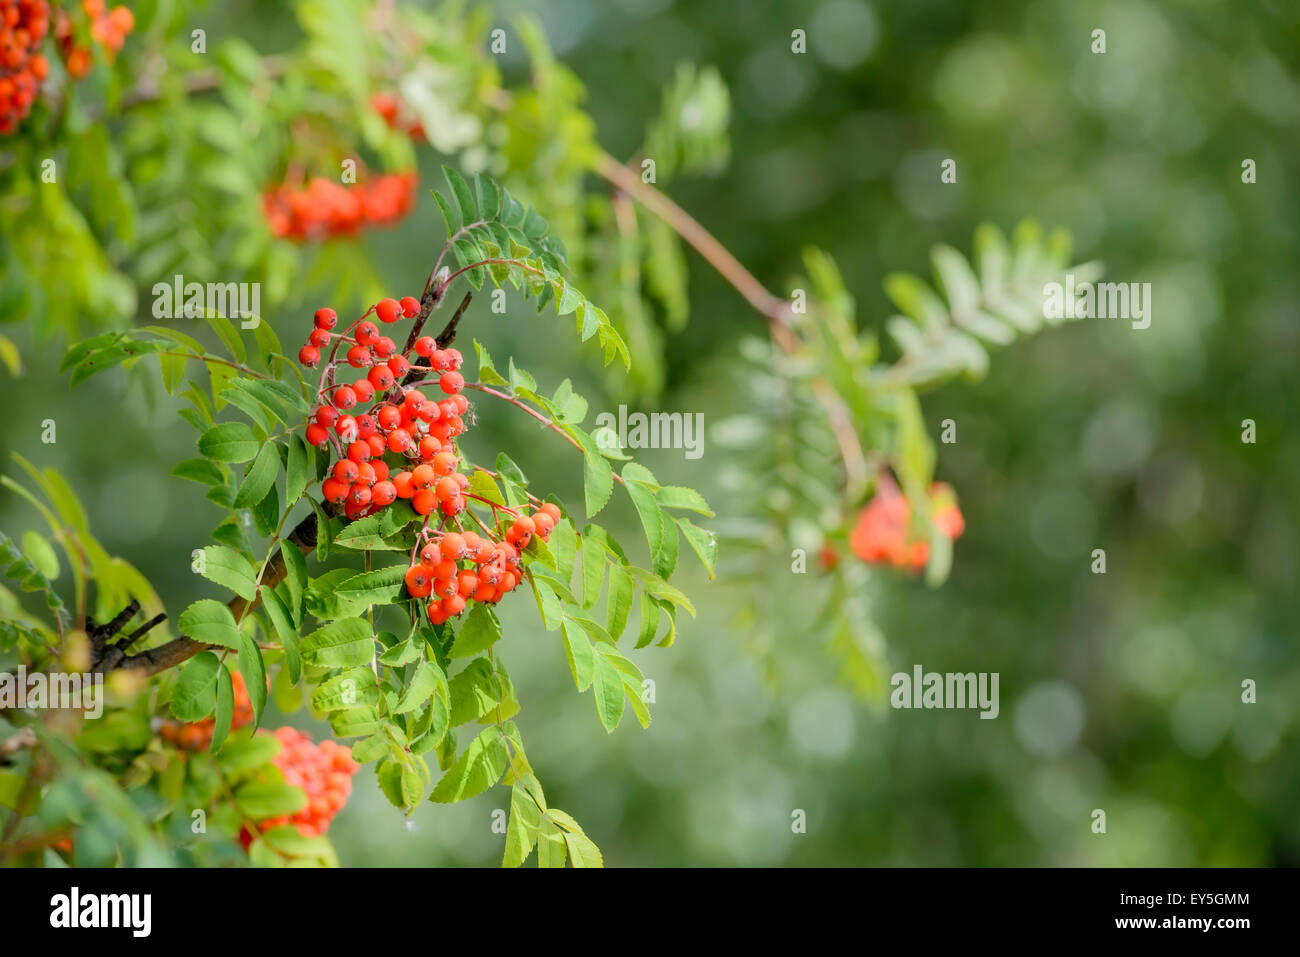 Detail of red Rowan (Sorbus) fruits on the tree branch Stock Photo